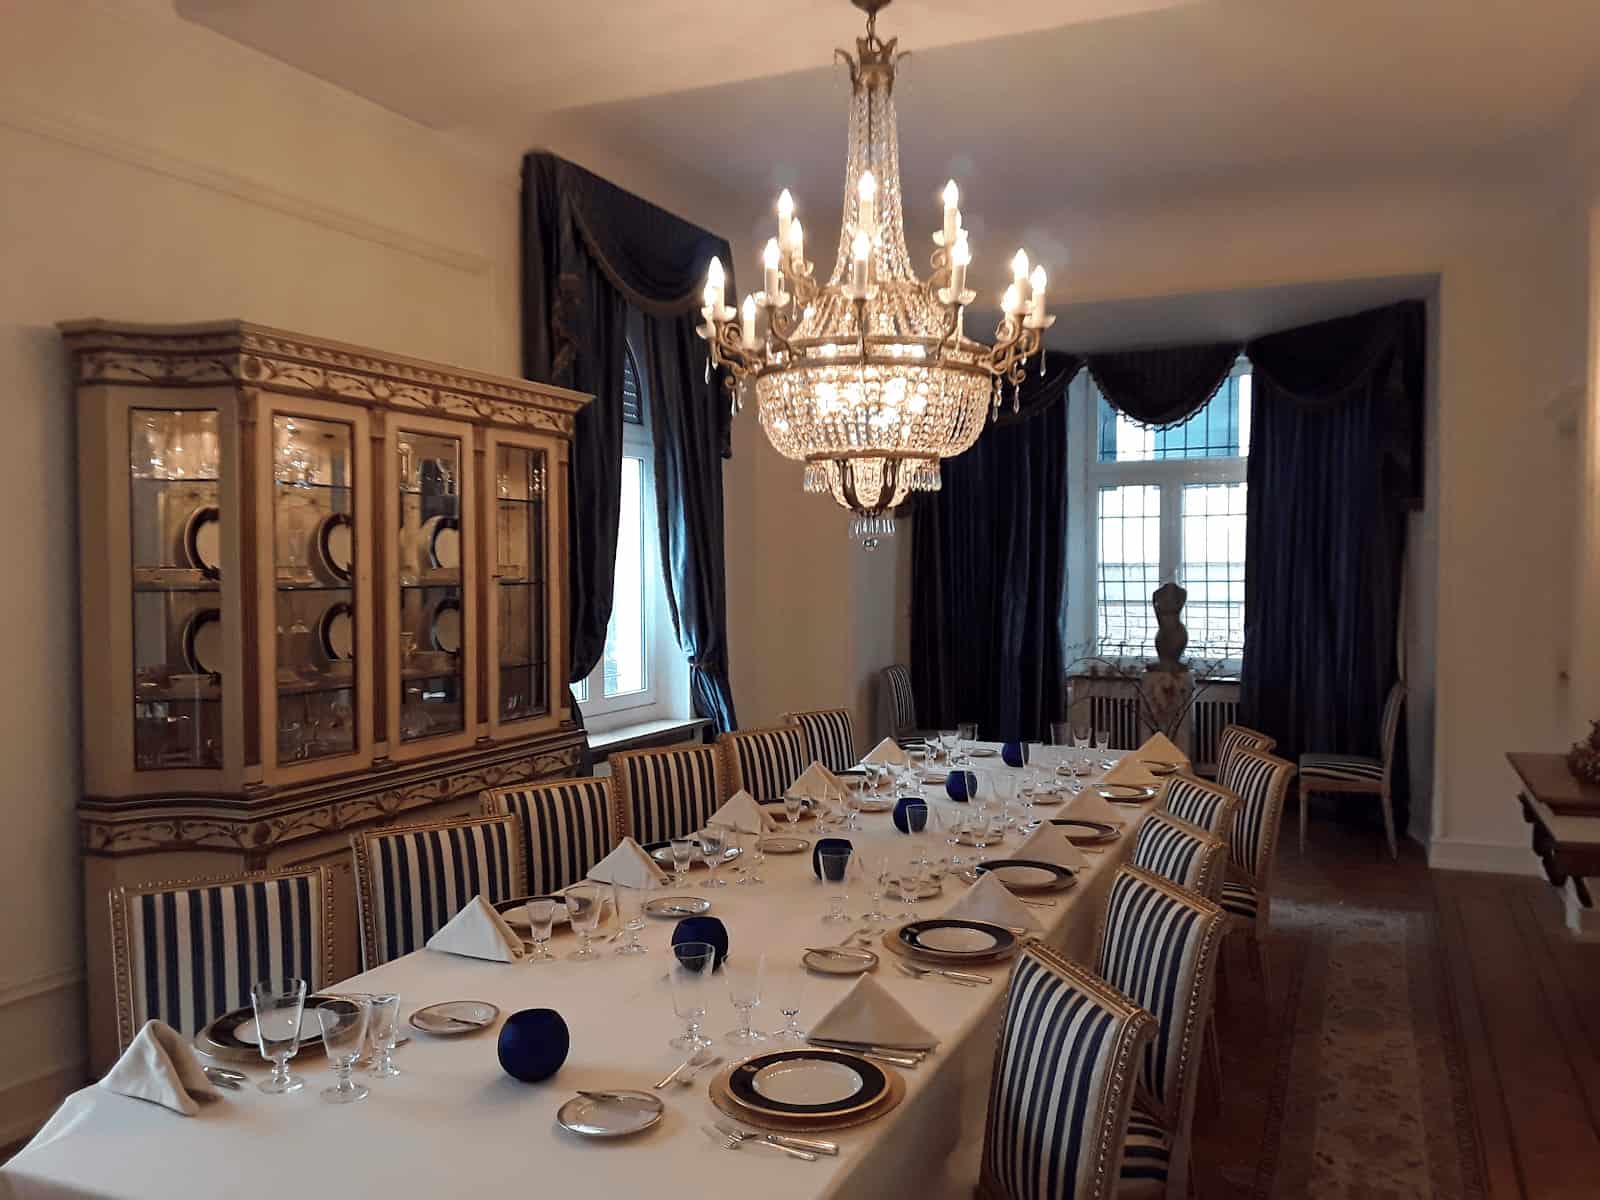 U.S. Embassy Luxembourg Dining Room (2016) | Wikimedia Commons